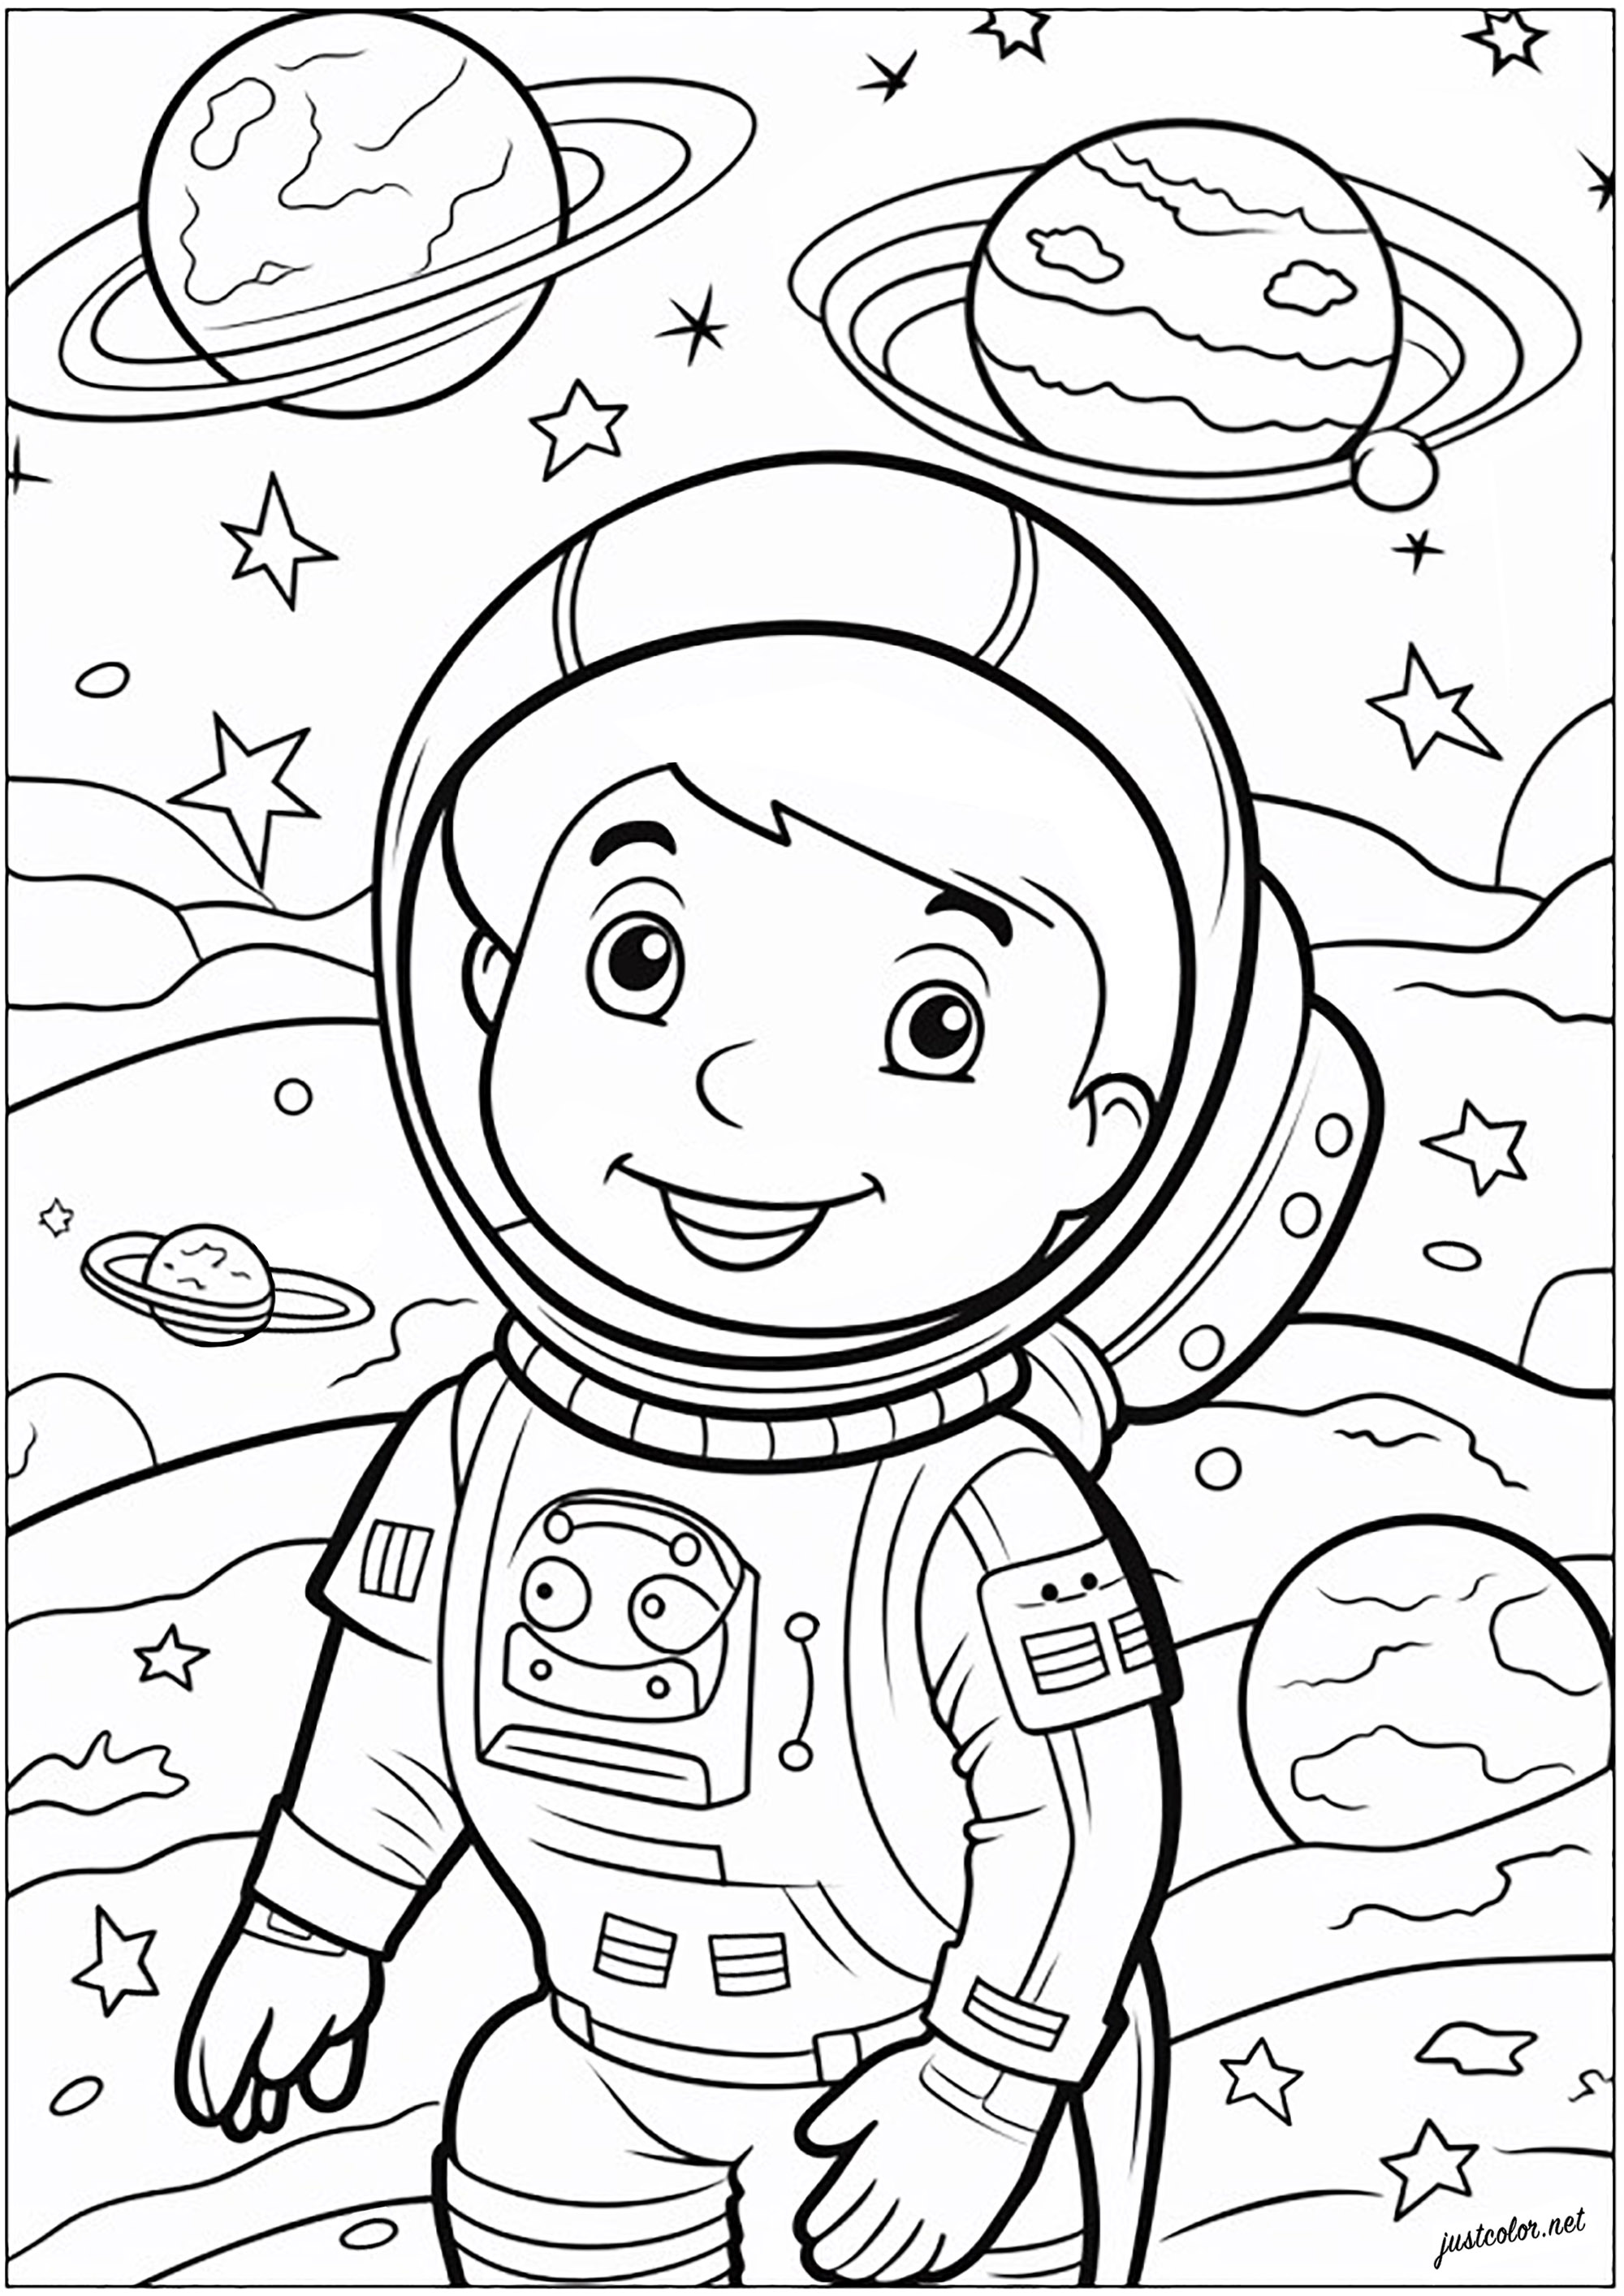 Coloring page of a little astronaut. Young astronaut depicted in space, floating among stars and planets